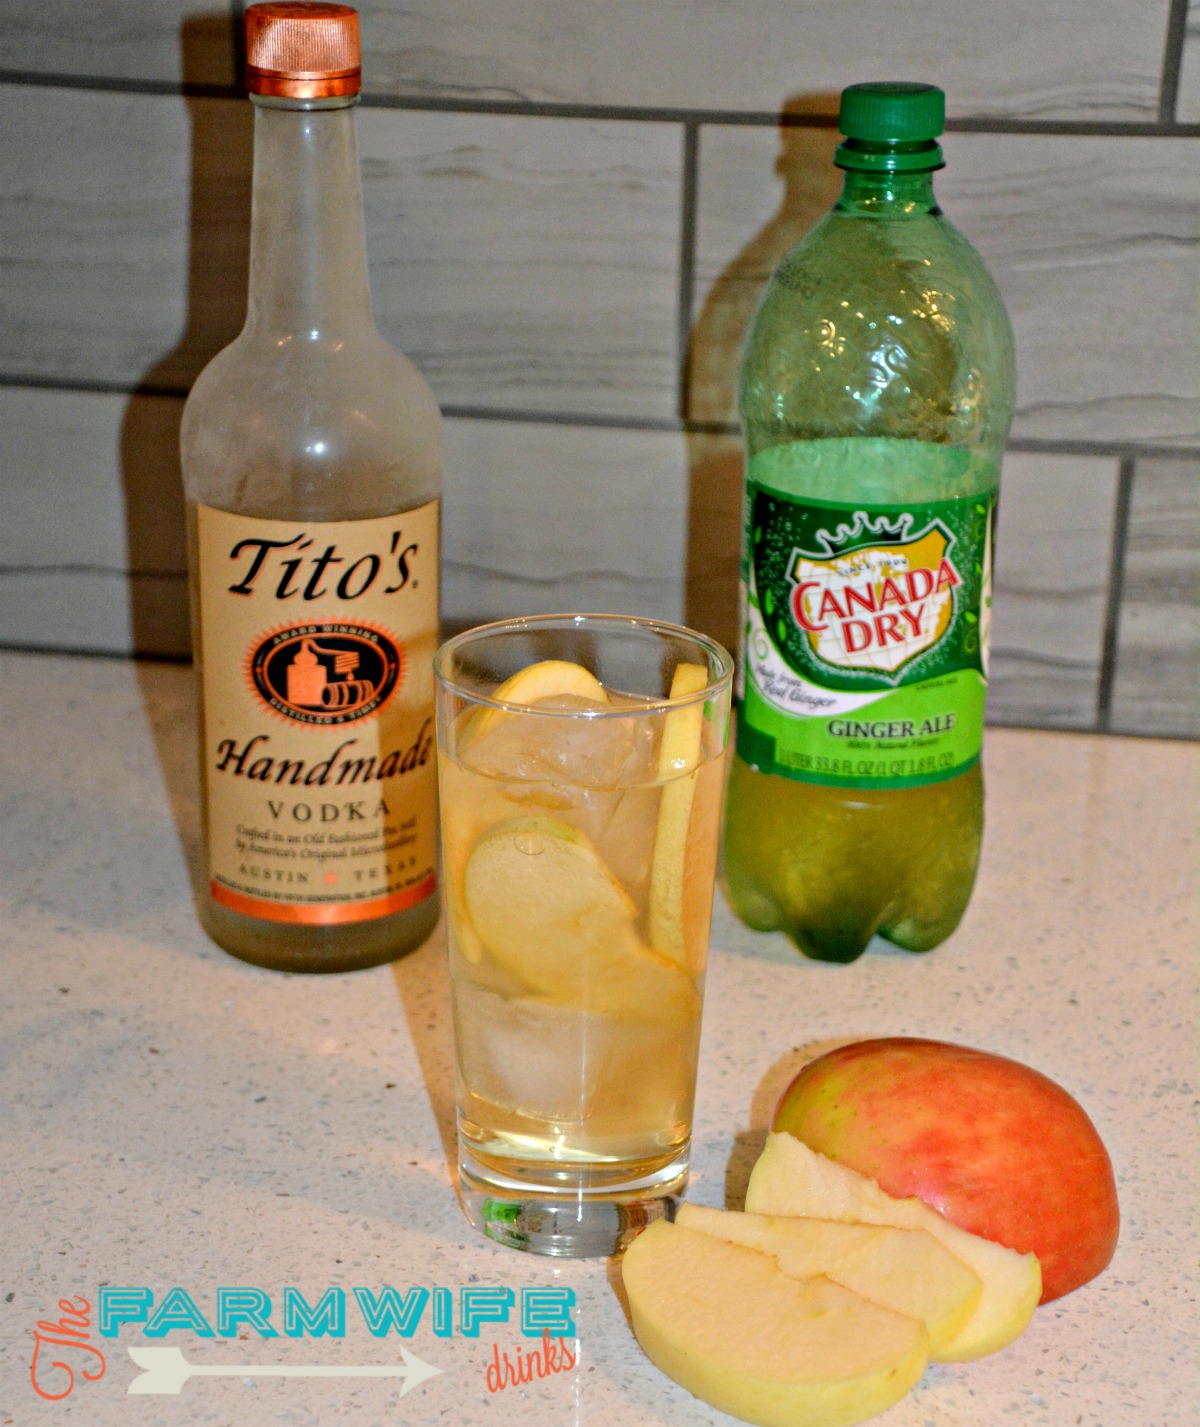 Ginger Apple Cocktail Made With Apple Infused Vodka The Farmwife Drinks,Egg Roll Wrapper Recipes Chicken